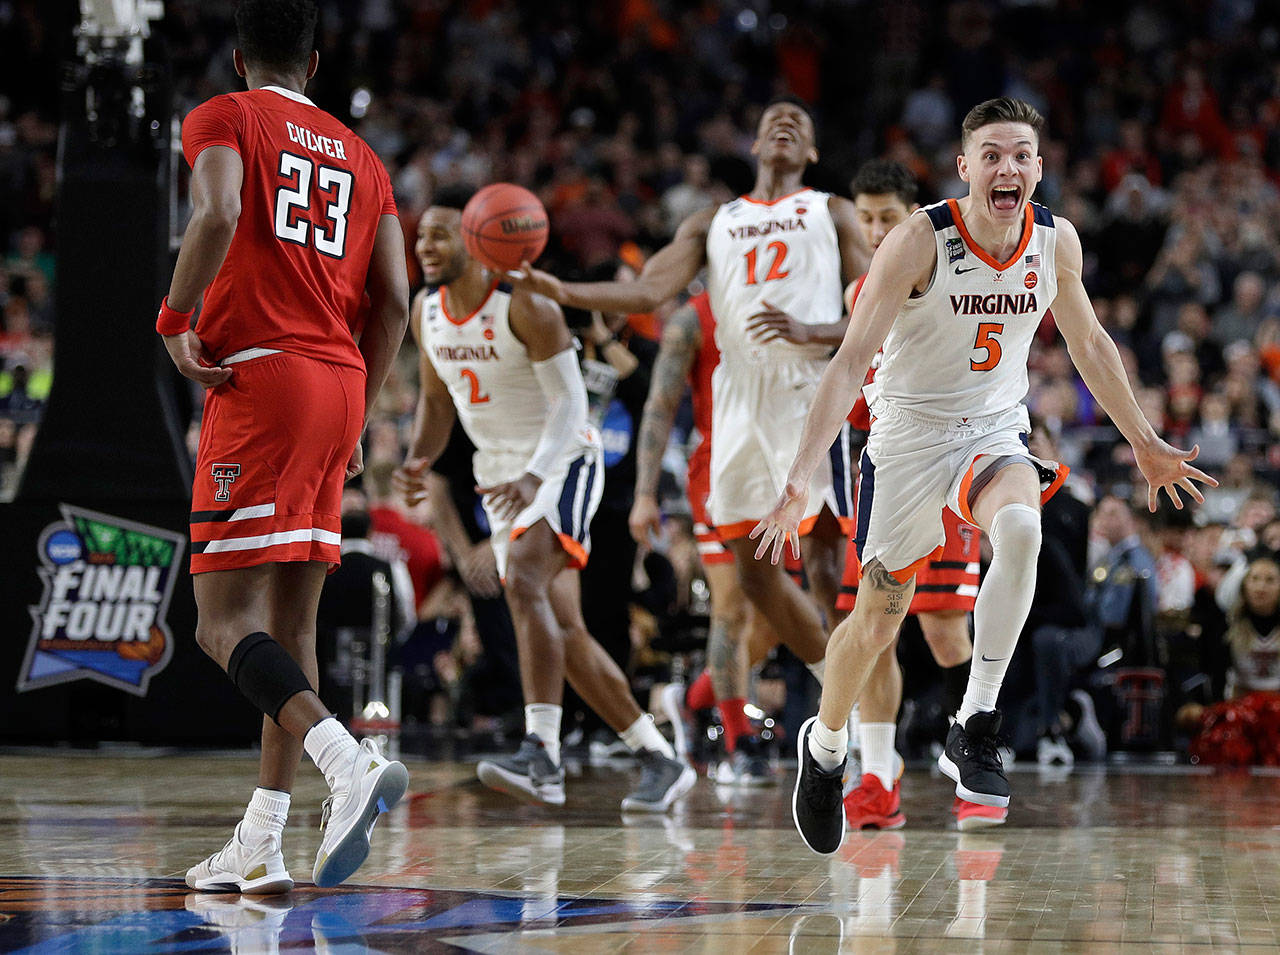 Virginia’s Kyle Guy (5) celebrates in front of Texas Tech’s Jarrett Culver (23) as the Cavaliers ran out the clock on their 85-77 overtime victory over the Red Raiders in the NCAA tournament championship game Monday in Minneapolis. (AP Photo/David J. Phillip)